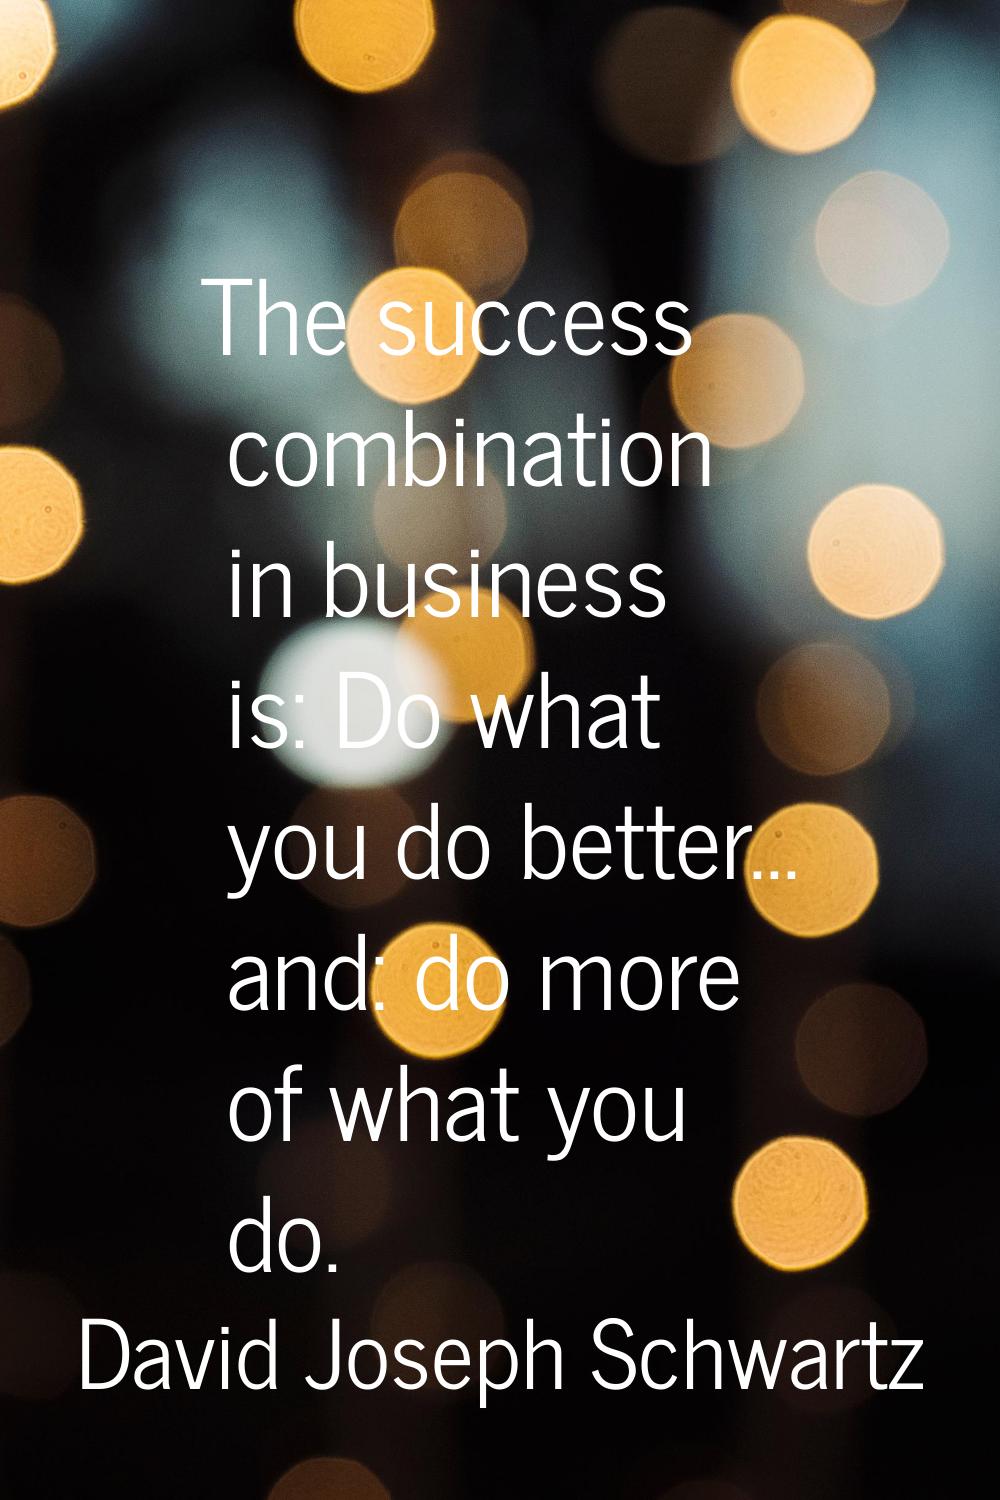 The success combination in business is: Do what you do better... and: do more of what you do.